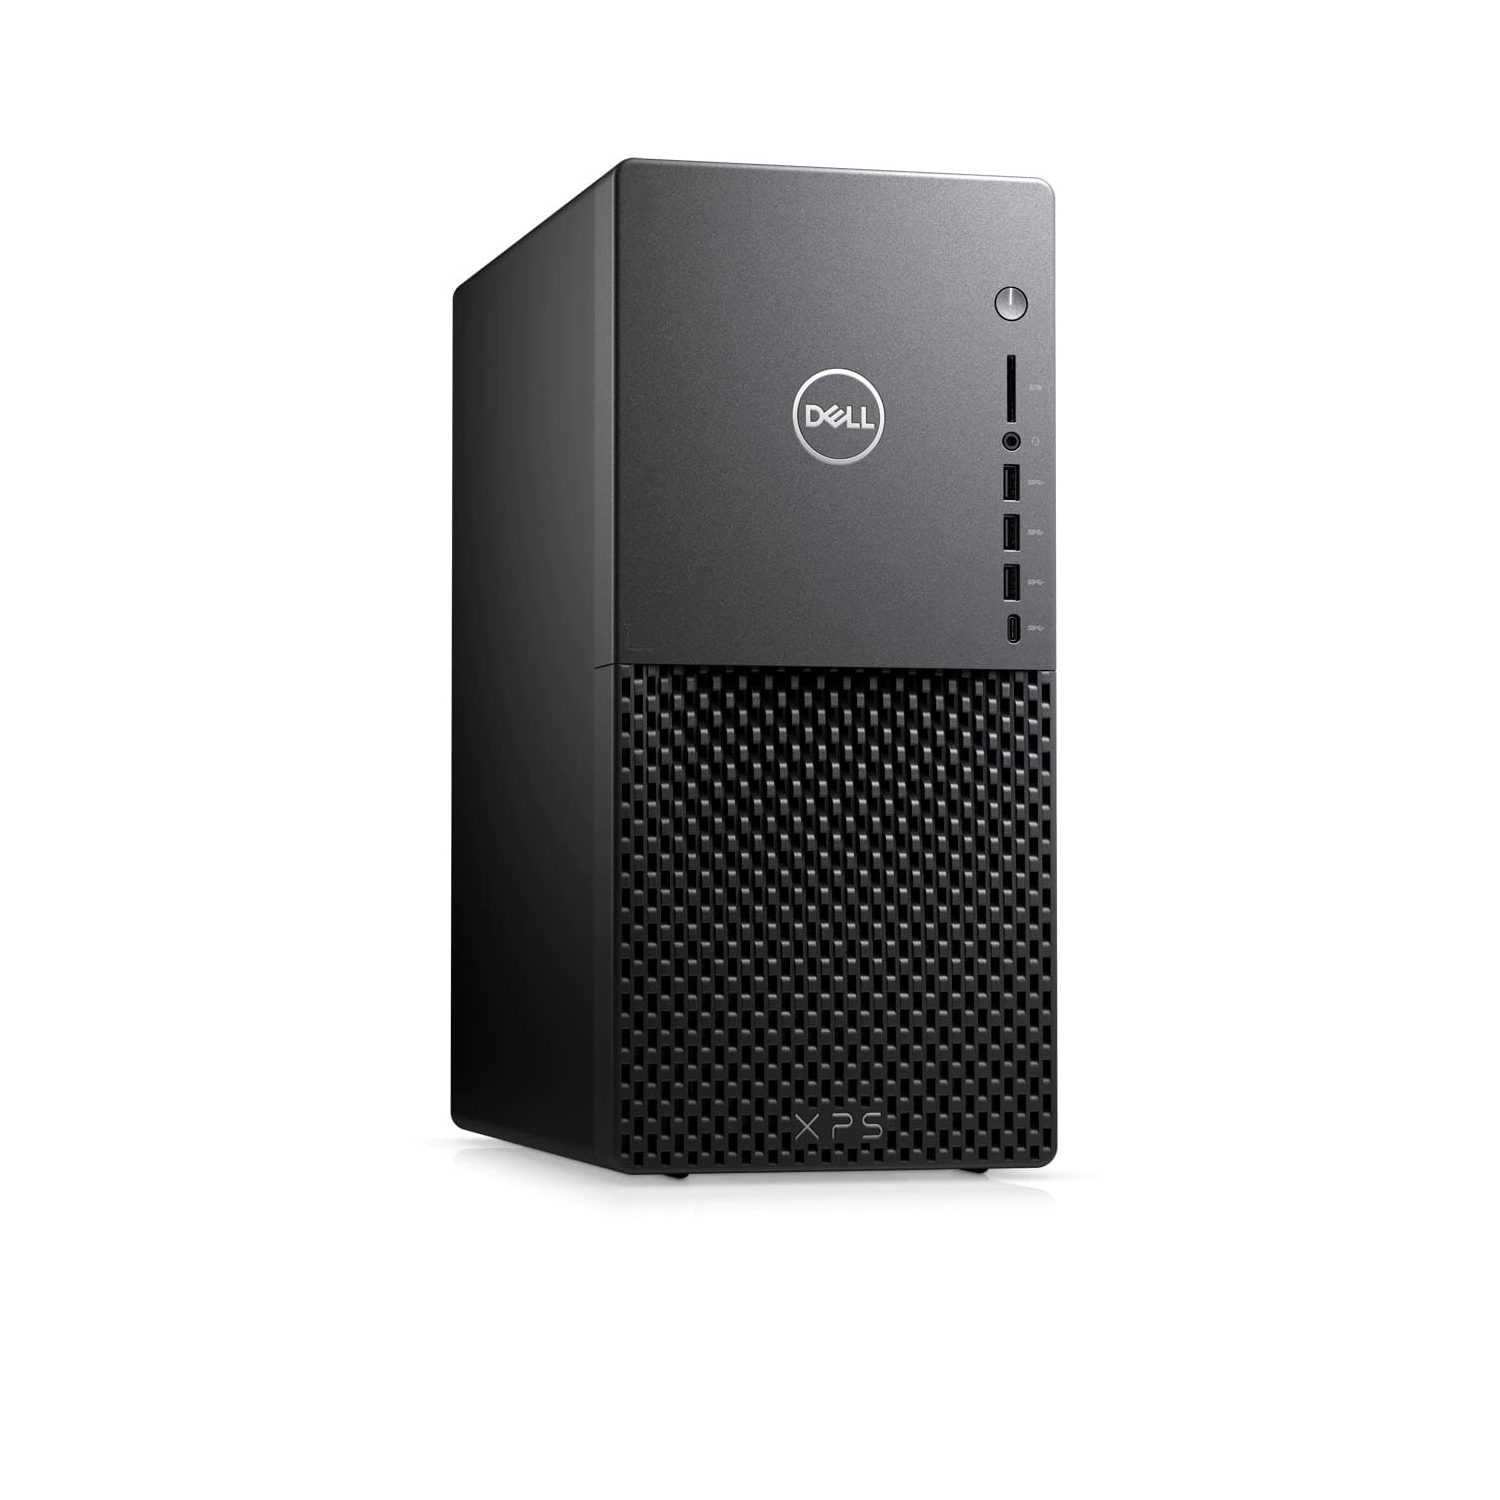 Refurbished (Excellent) - Dell XPS 8940 Desktop (2020) | Core i7 - 1TB HDD + 256GB SSD - 16GB RAM - RX 5600 | 8 Cores @ 4.8 GHz - 10th Gen CPU Certified Refurbished